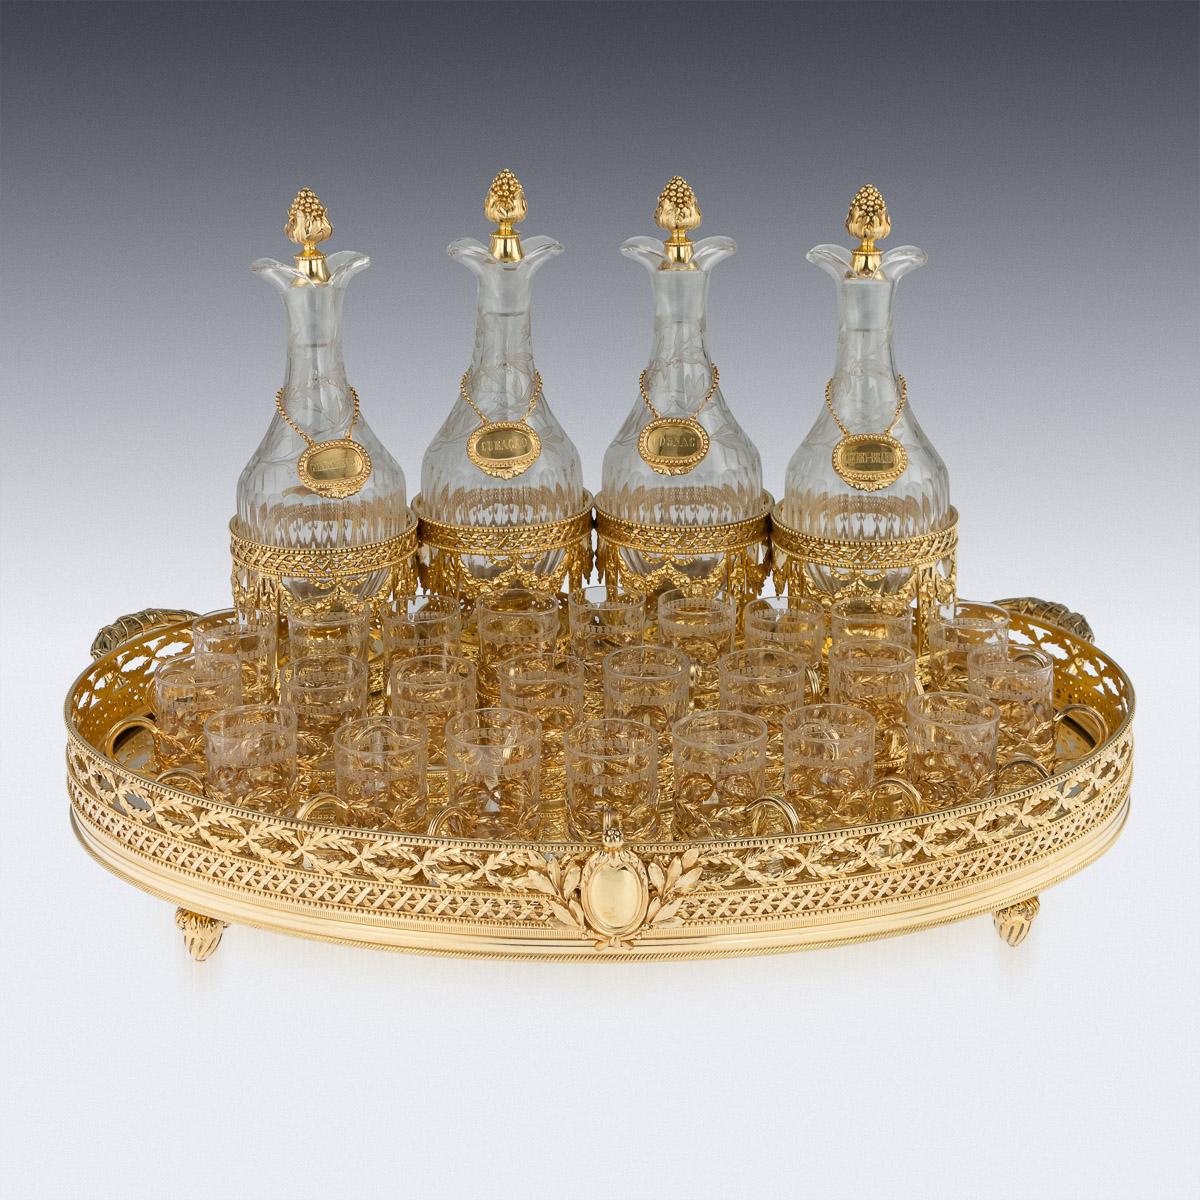 Antique late-19th century French exquisite solid silver-gilt liqueur service, consisting of 4 liqueur bottles, 24 cups, 4 labels and a mirror set serving tray. Made in the Louis XVI style decorated with pronounced beaded boarders, laurel garlands